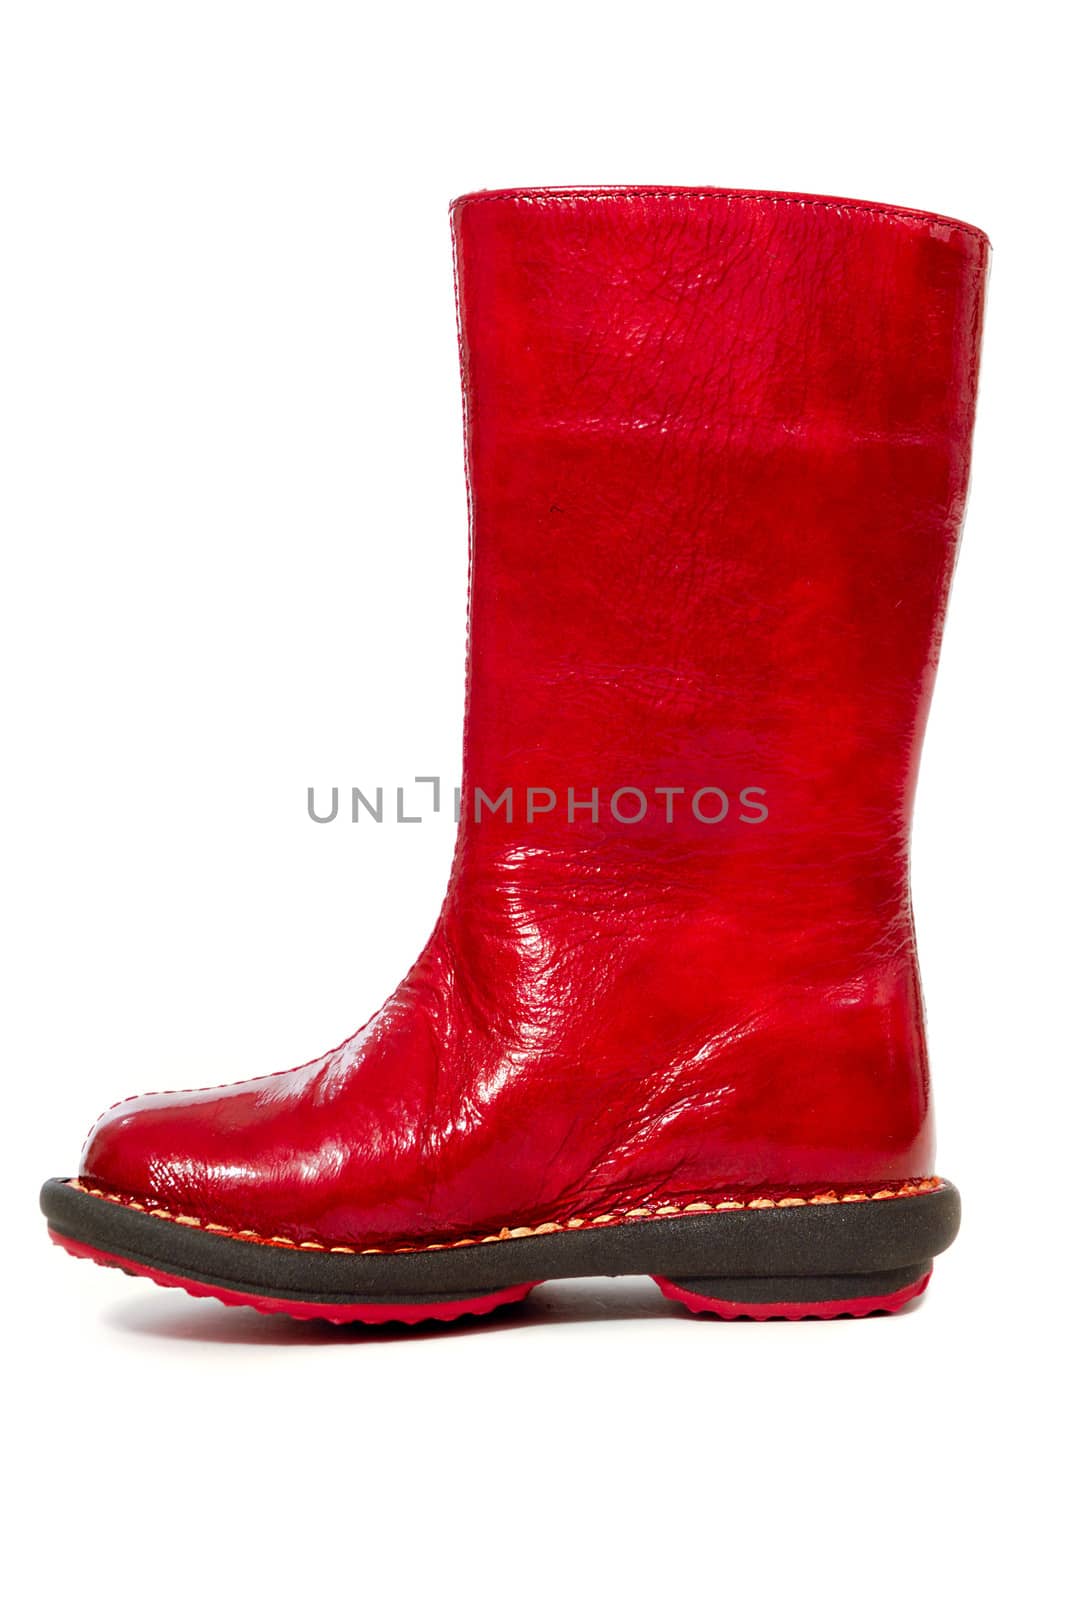 Red boot by cfoto